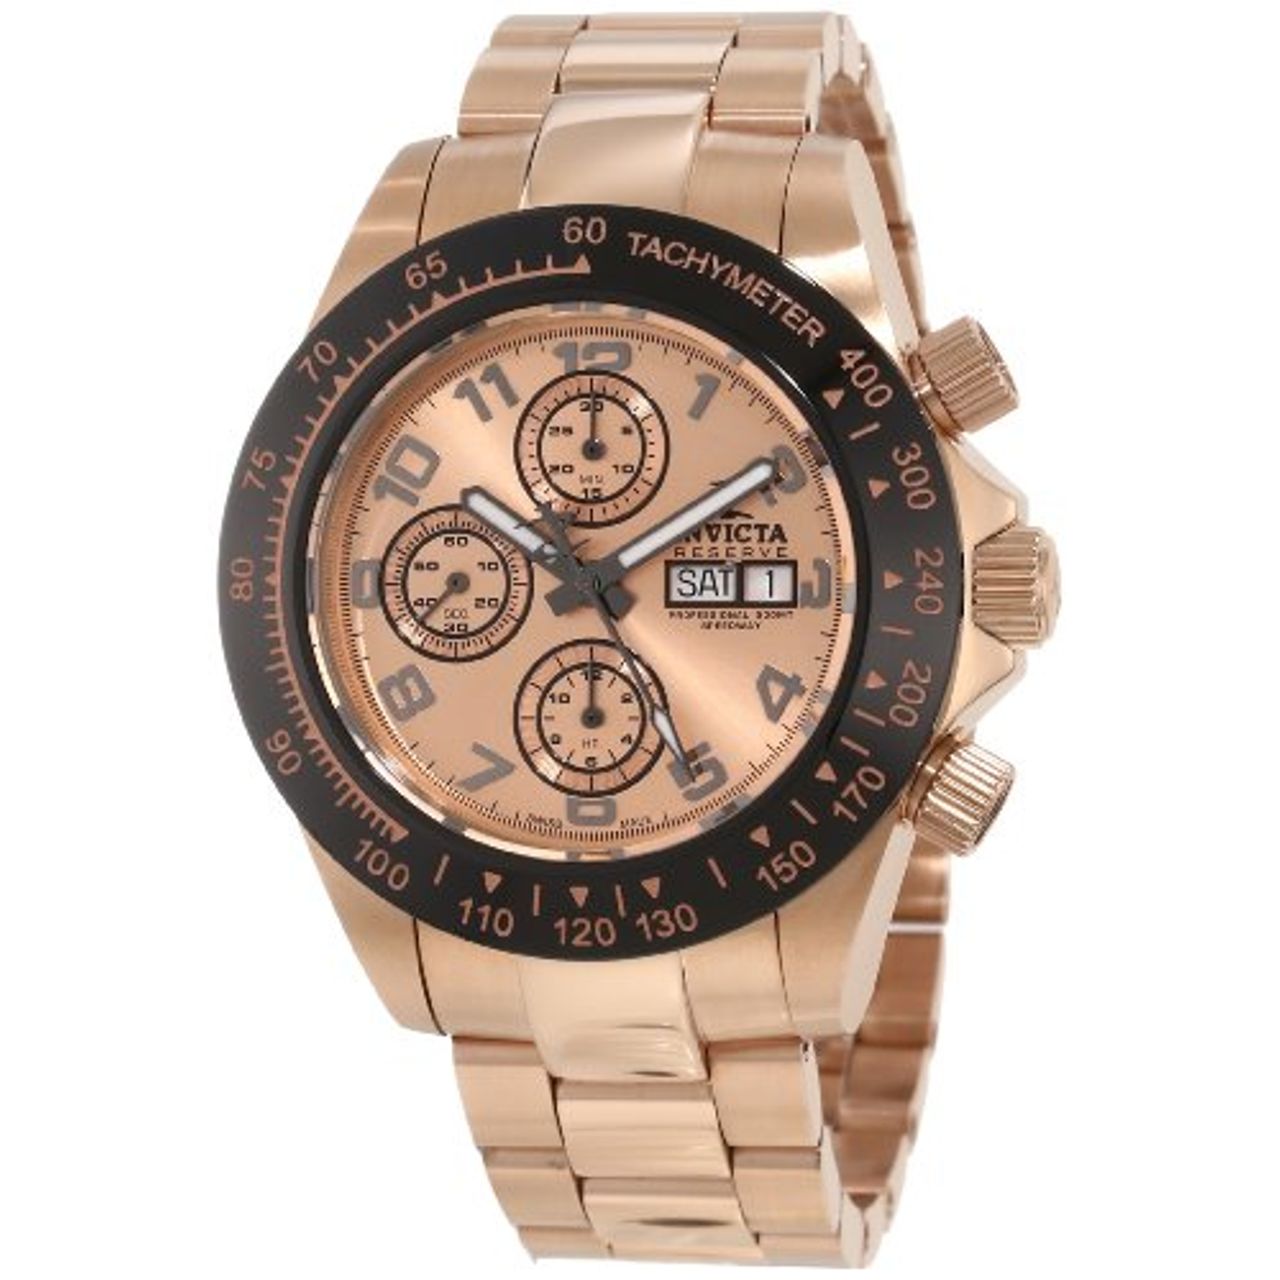 Invicta Men's 10938 Speedway Automatic Chronograph Rose Dial Watch